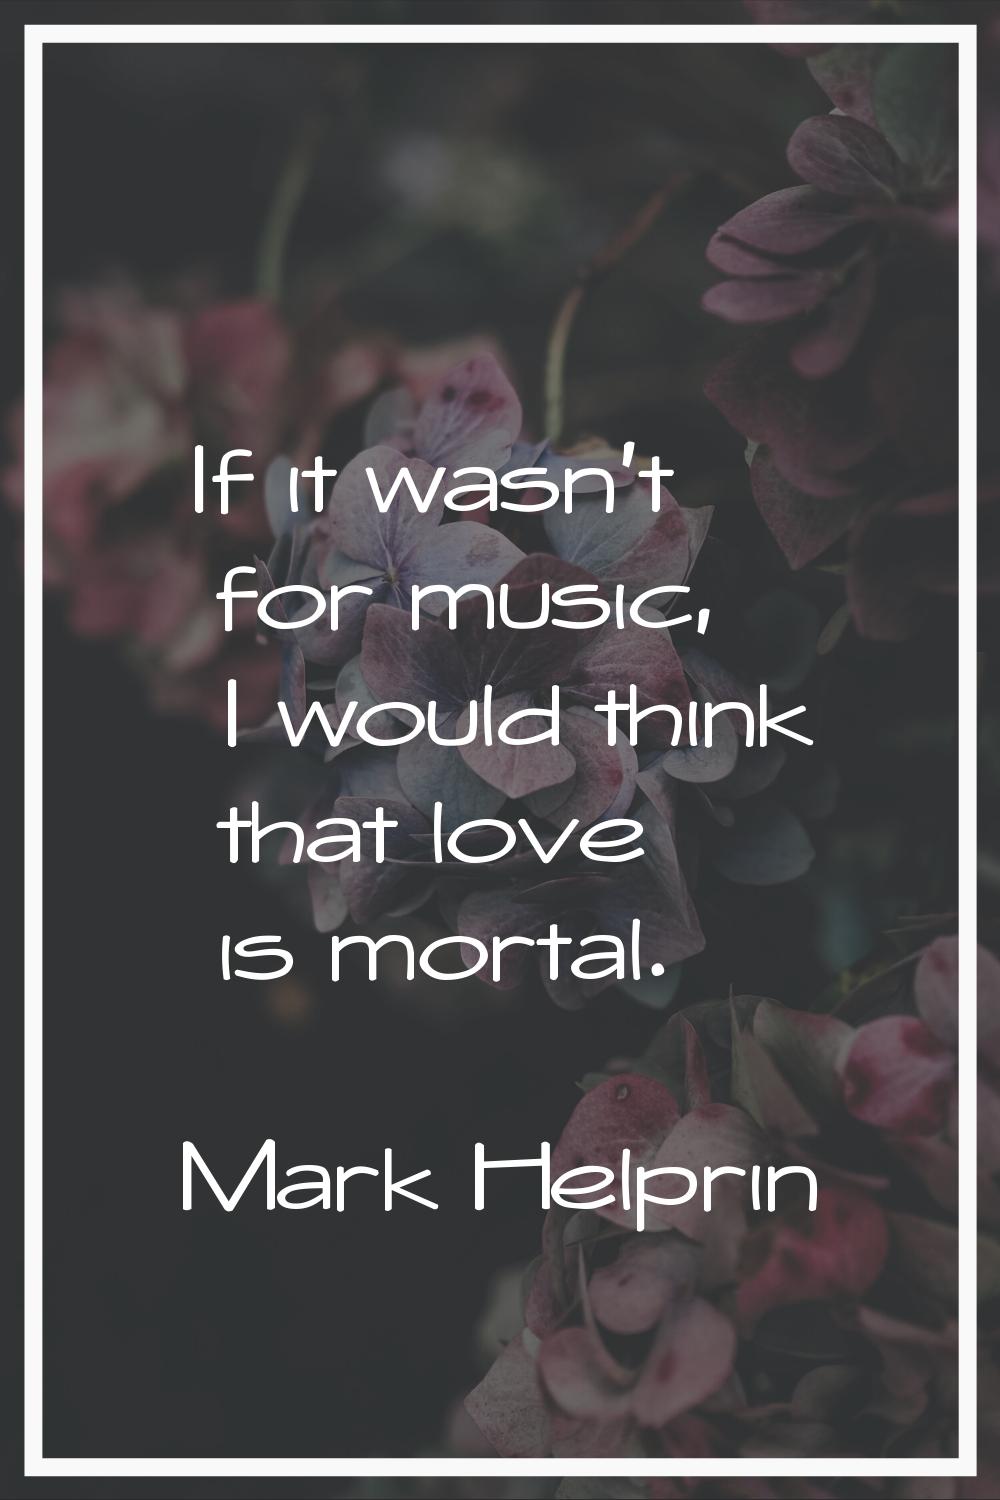 If it wasn't for music, I would think that love is mortal.